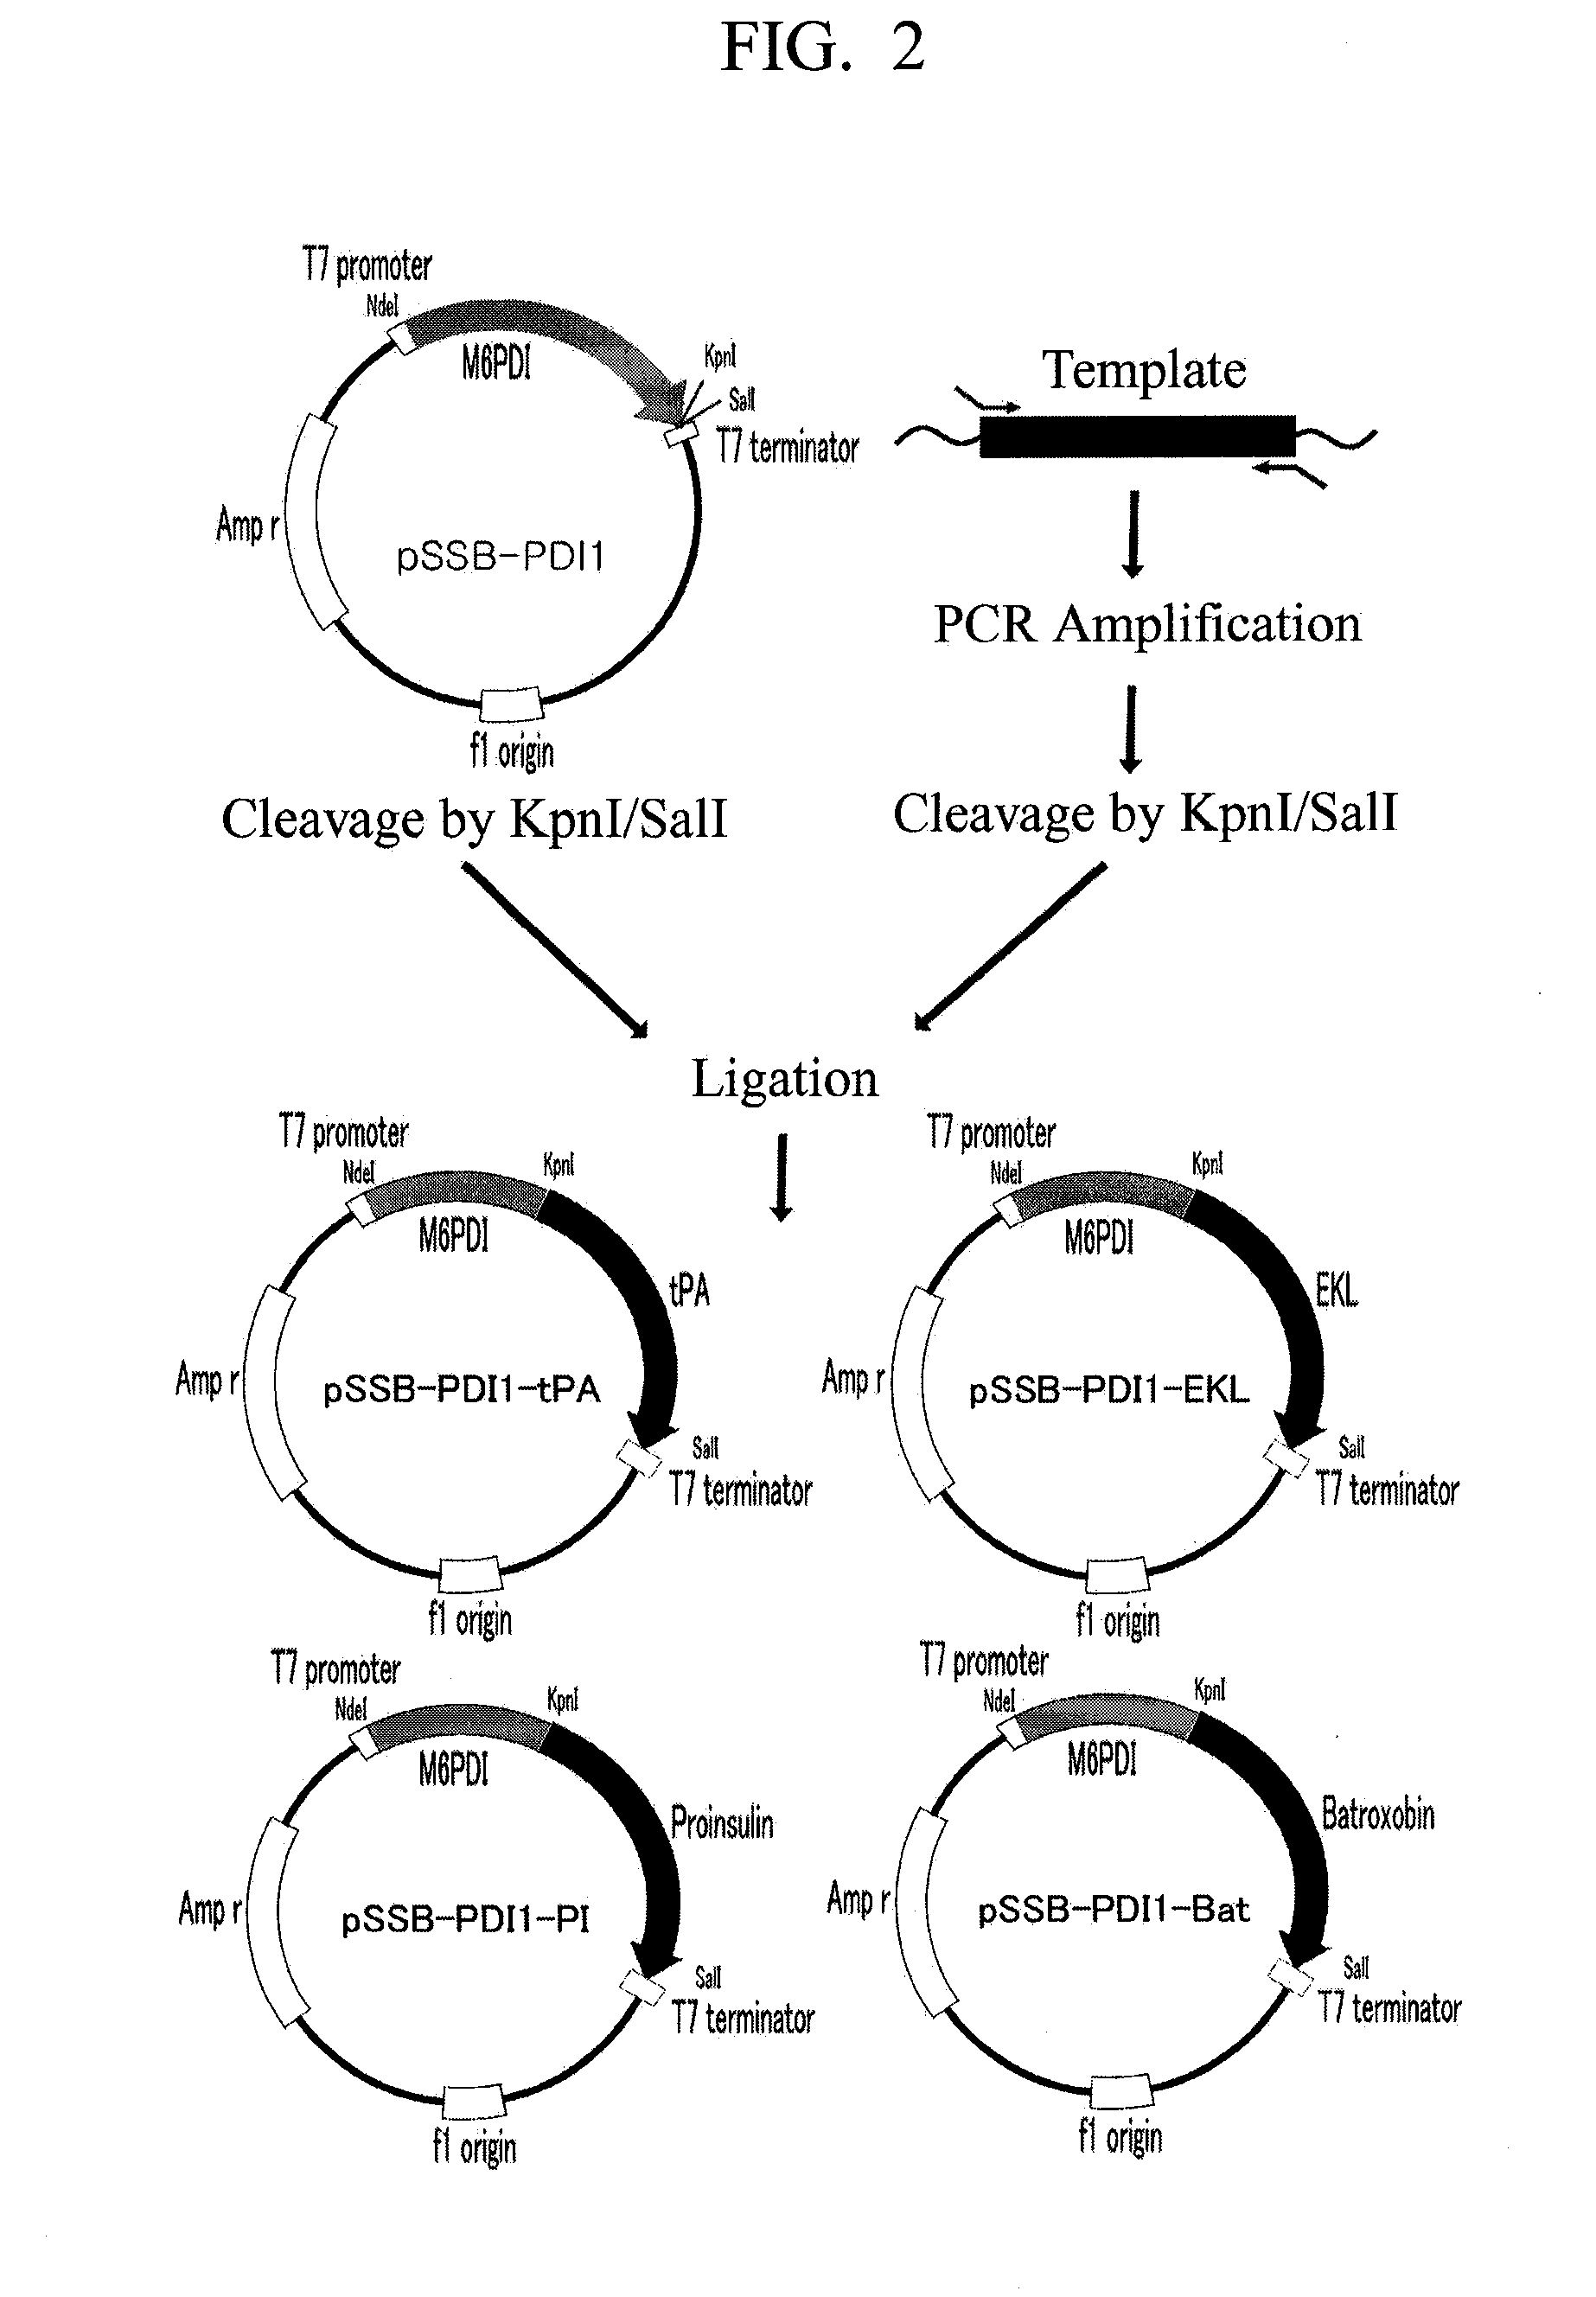 Method for preparing soluble and active recombinant proteins using pdi as a fusion partner